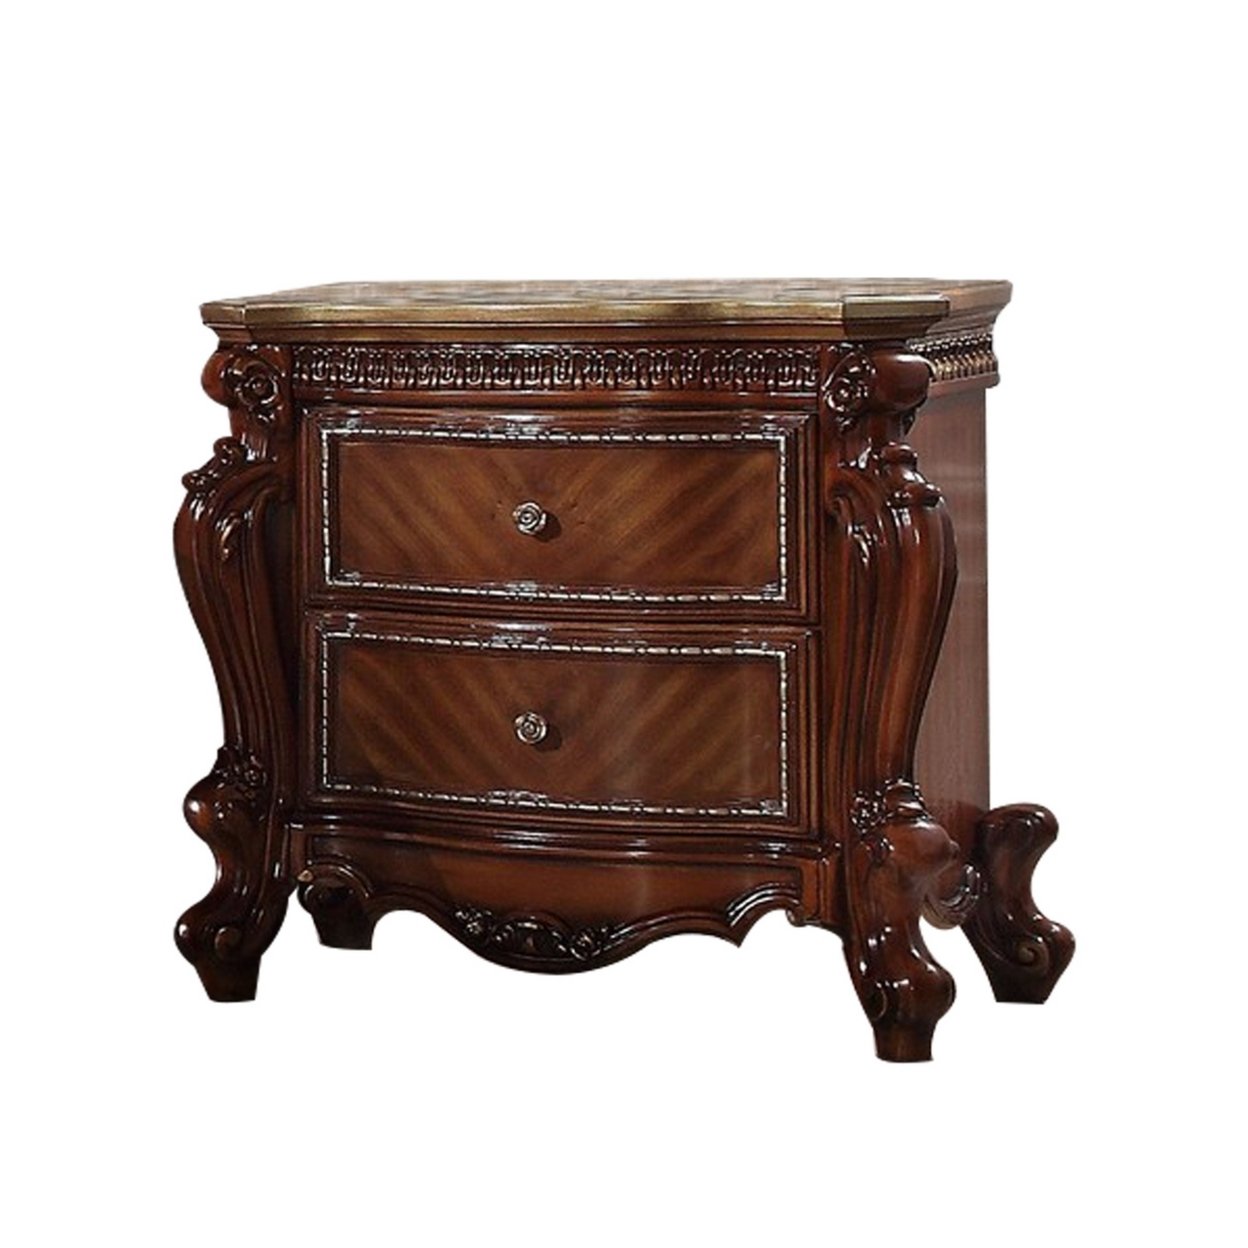 2 Drawer Wooden Nightstand With Metal Knobs And Carved Details, Brown- Saltoro Sherpi